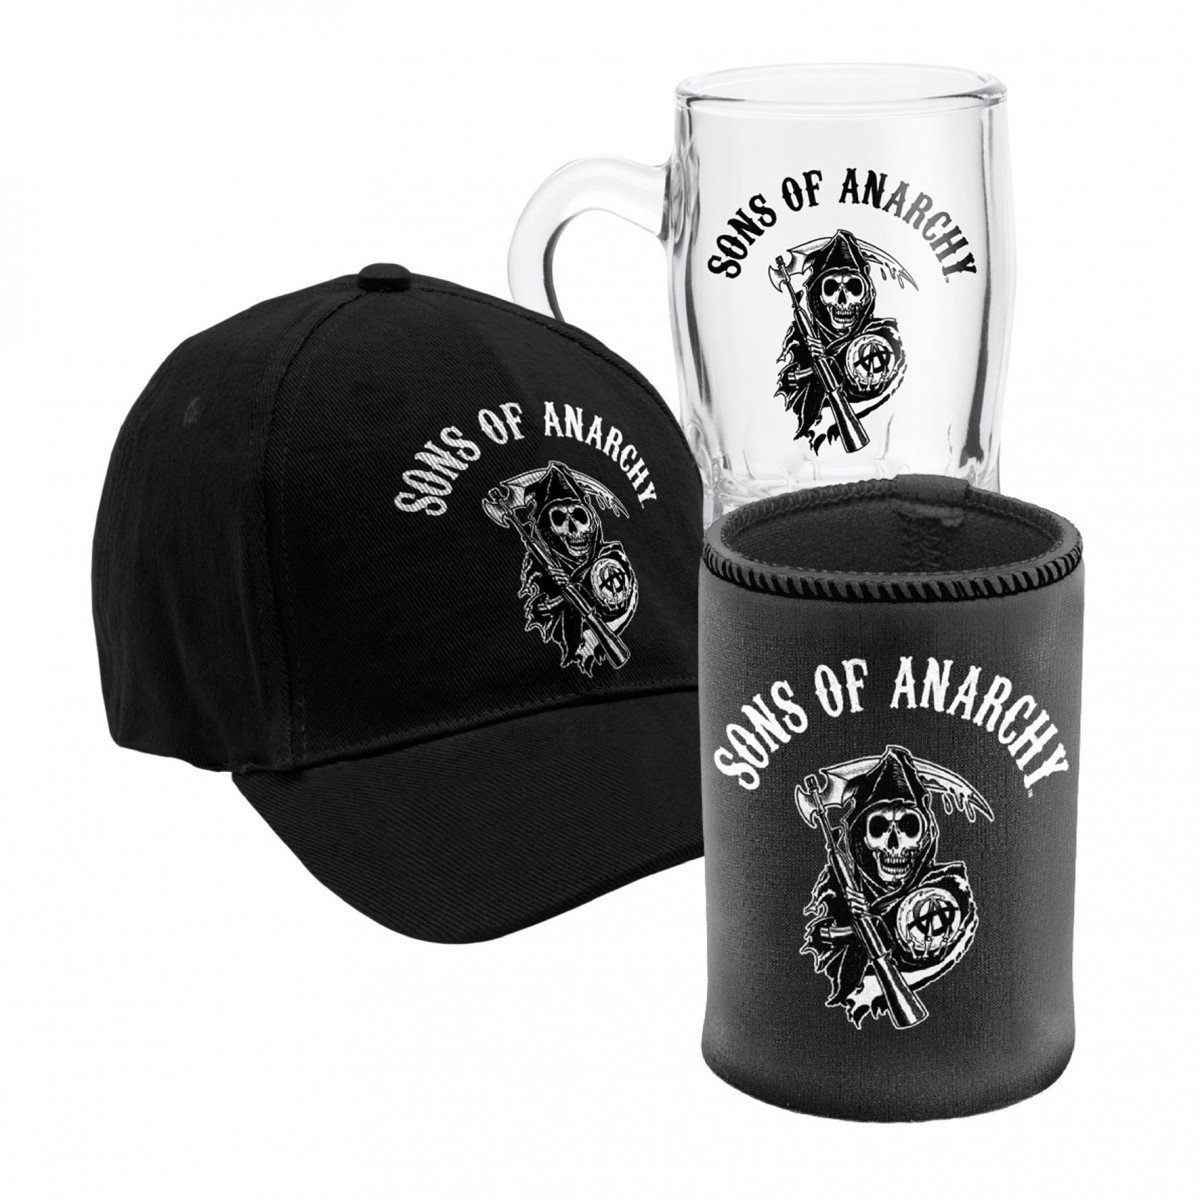 10 Attractive Sons Of Anarchy Gift Ideas sons of anarchy gift pack glassware barware man zone gift 2022